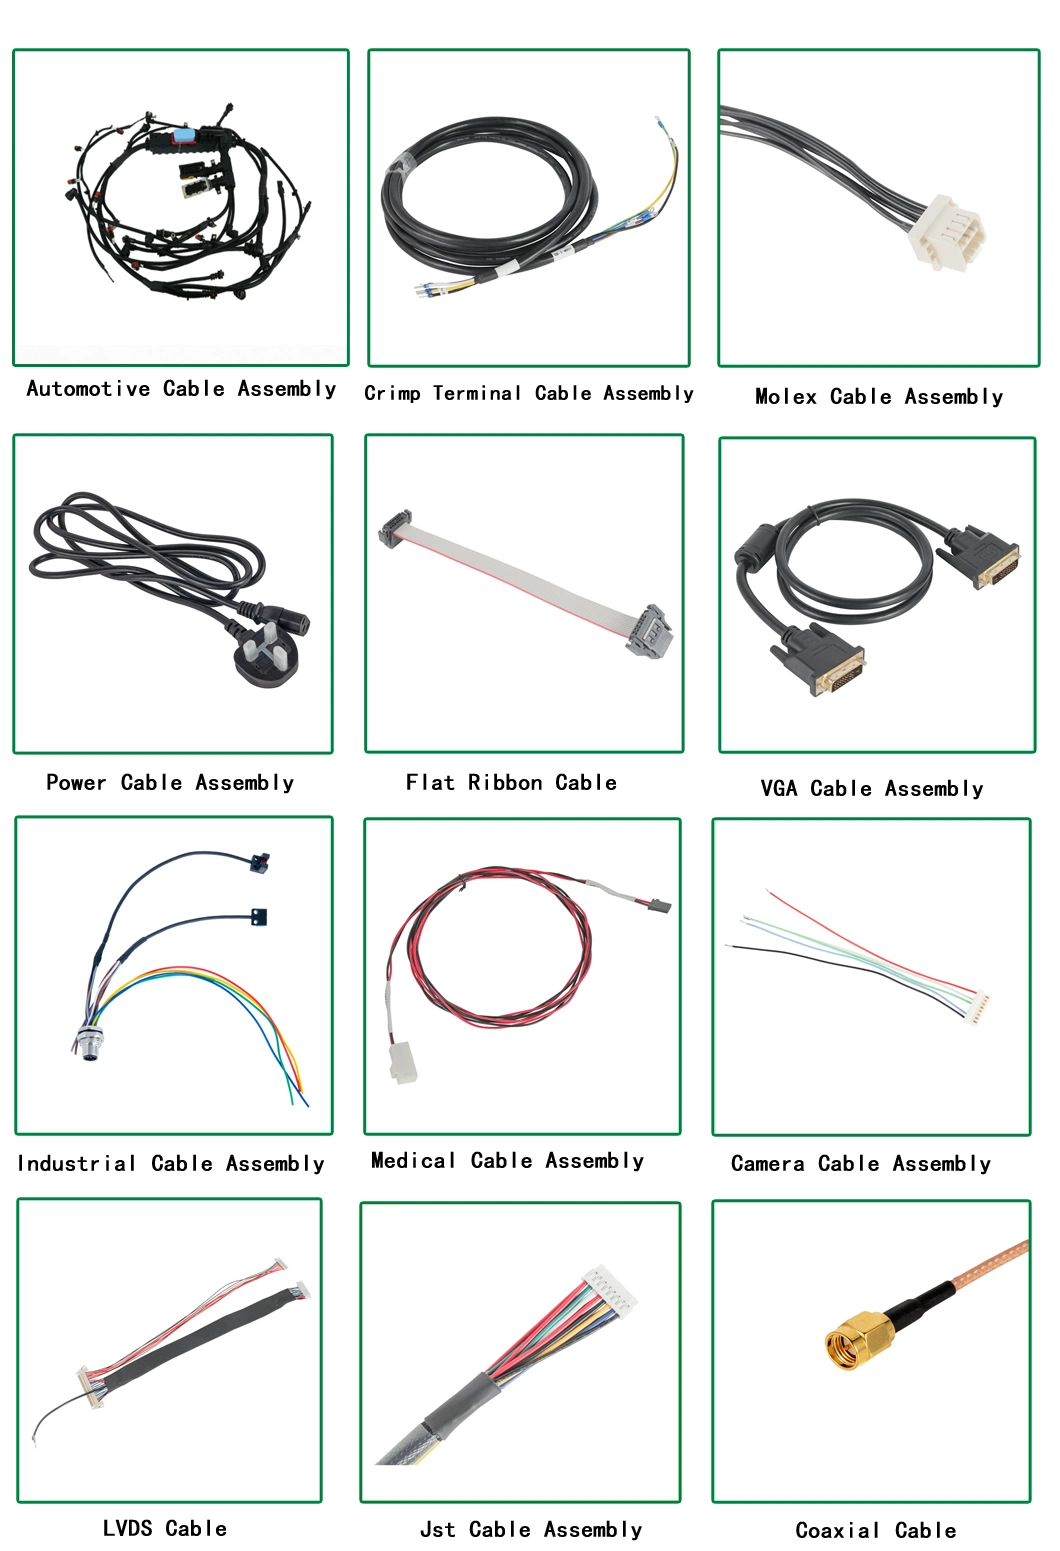 Automobile Automotive Cable Assembly Auto Wiring Harness Internal Energy Storage Supply